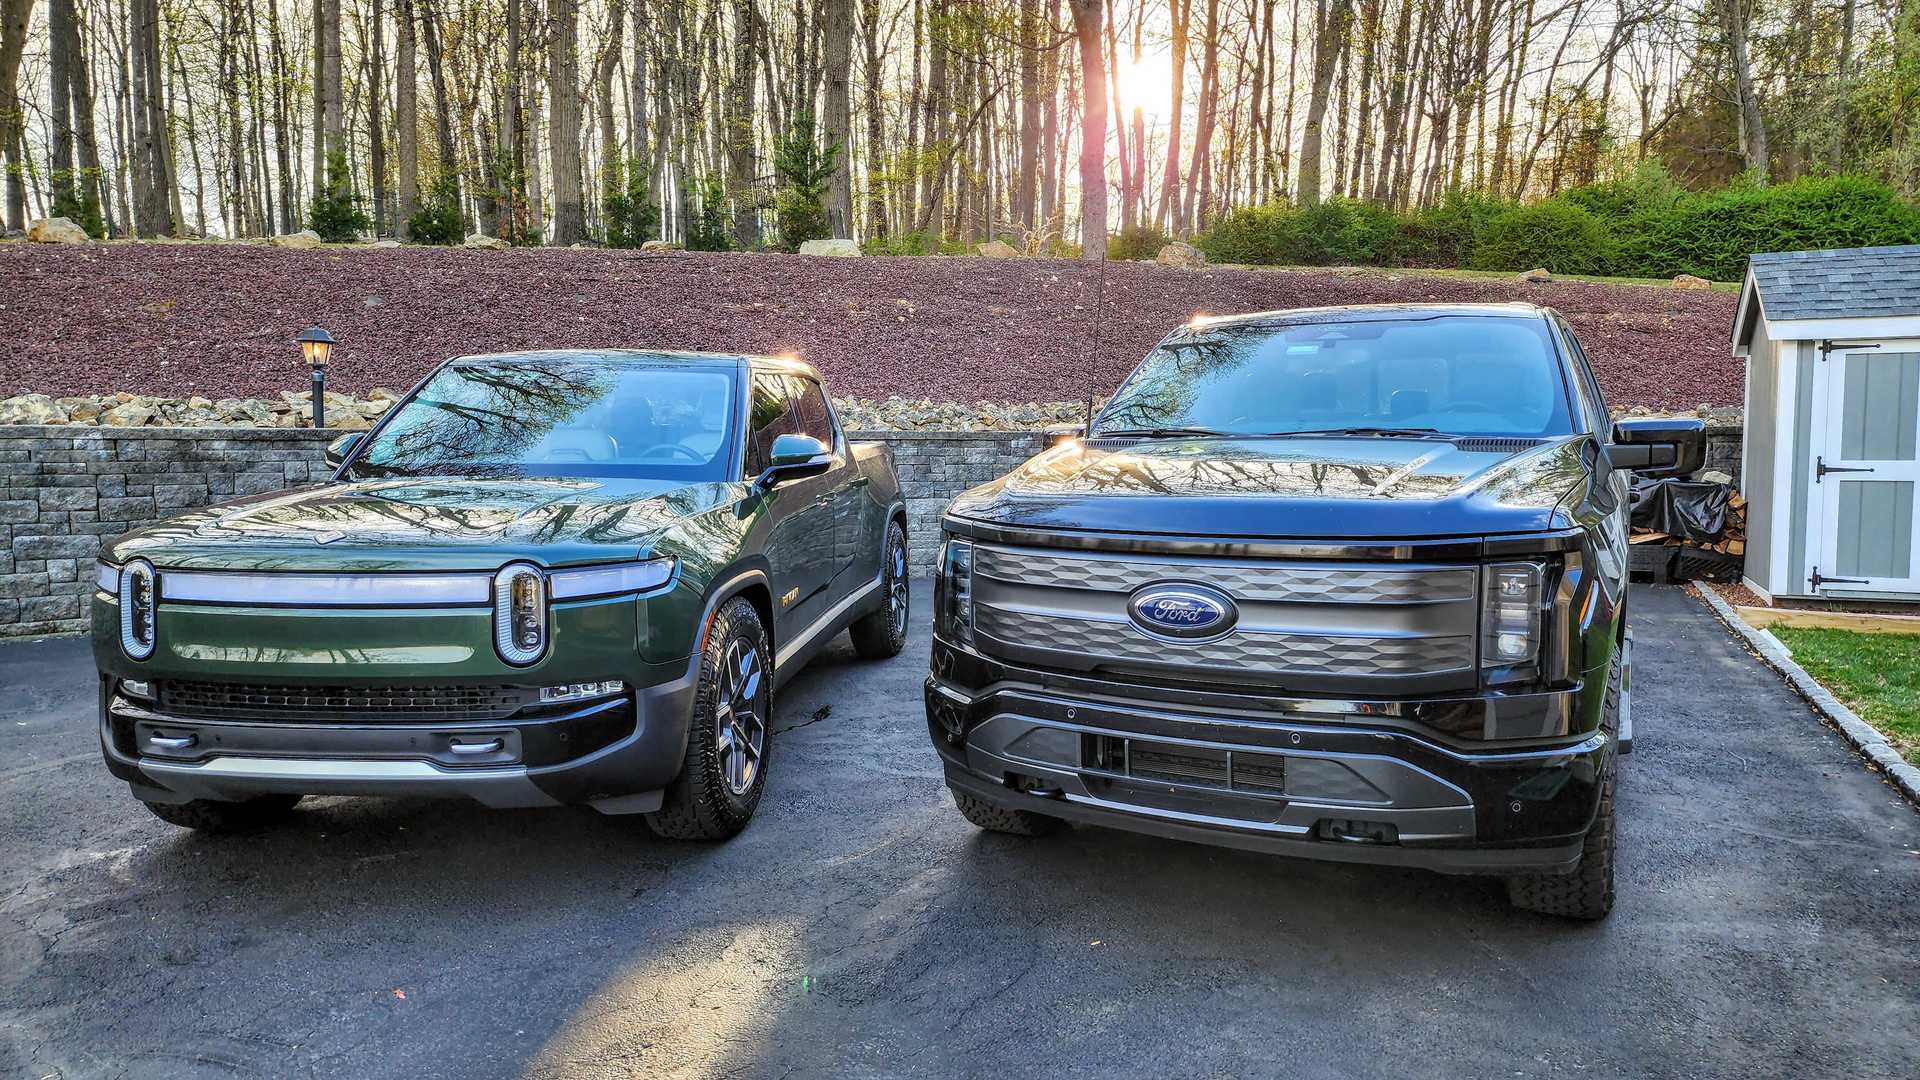 rivian vs ford: which electric pickup truck can go farther?